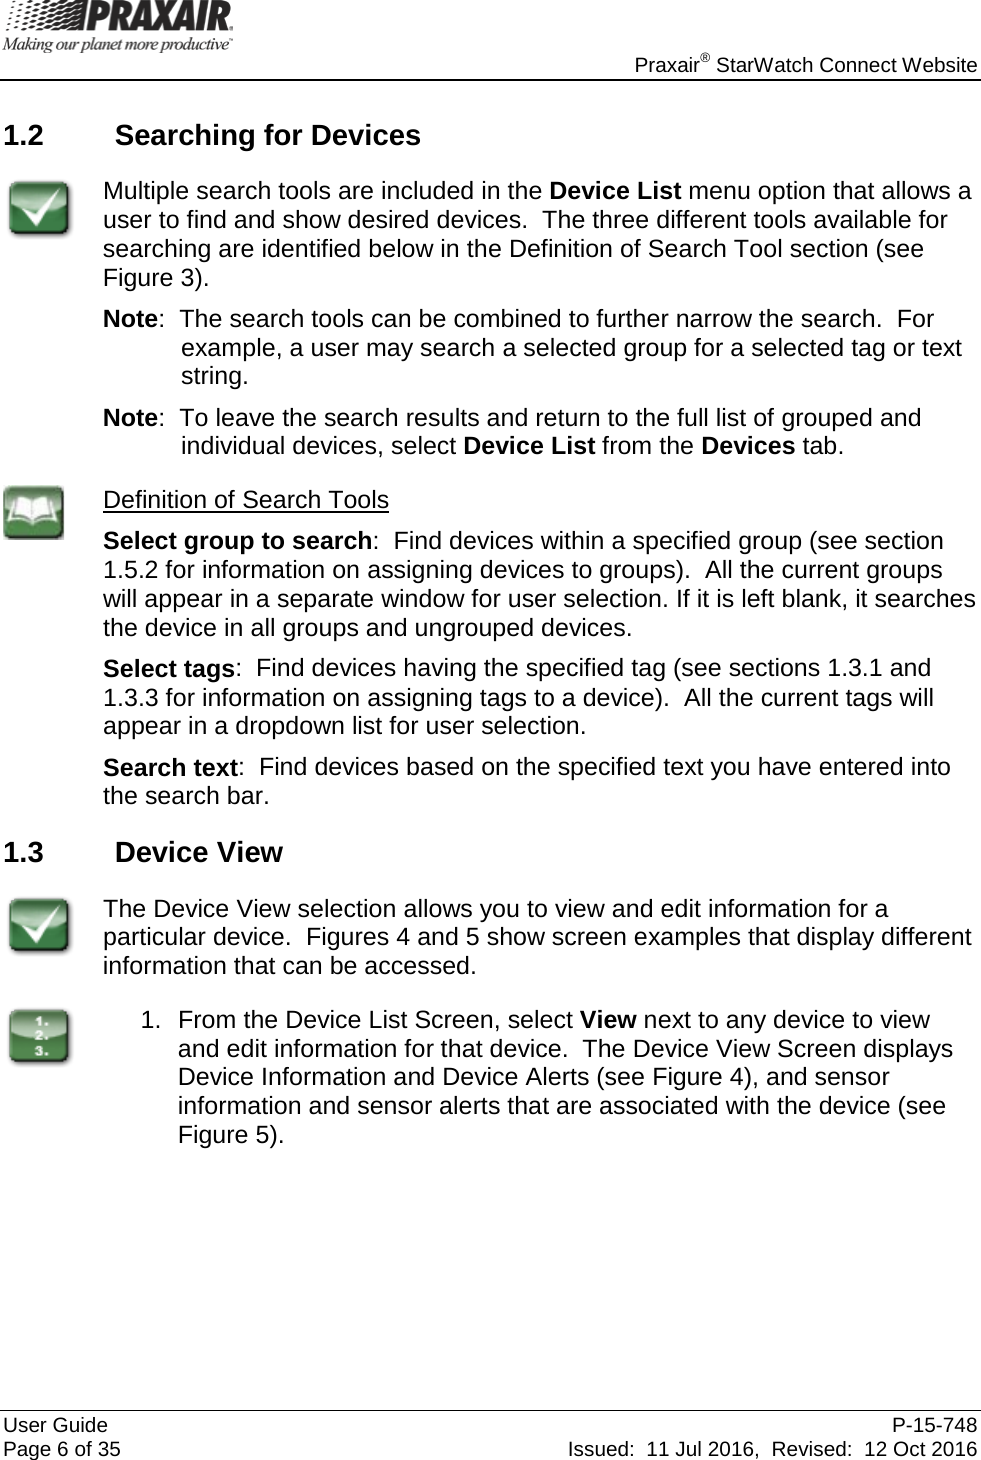    Praxair® StarWatch Connect Website User Guide  P-15-748 Page 6 of 35 Issued:  11 Jul 2016,  Revised:  12 Oct 2016 1.2 Searching for Devices  Multiple search tools are included in the Device List menu option that allows a user to find and show desired devices.  The three different tools available for searching are identified below in the Definition of Search Tool section (see  Figure 3). Note:  The search tools can be combined to further narrow the search.  For example, a user may search a selected group for a selected tag or text string. Note:  To leave the search results and return to the full list of grouped and individual devices, select Device List from the Devices tab.  Definition of Search Tools Select group to search:  Find devices within a specified group (see section 1.5.2 for information on assigning devices to groups).  All the current groups will appear in a separate window for user selection. If it is left blank, it searches the device in all groups and ungrouped devices. Select tags:  Find devices having the specified tag (see sections 1.3.1 and 1.3.3 for information on assigning tags to a device).  All the current tags will appear in a dropdown list for user selection. Search text:  Find devices based on the specified text you have entered into the search bar. 1.3 Device View  The Device View selection allows you to view and edit information for a particular device.  Figures 4 and 5 show screen examples that display different information that can be accessed.  1. From the Device List Screen, select View next to any device to view and edit information for that device.  The Device View Screen displays Device Information and Device Alerts (see Figure 4), and sensor information and sensor alerts that are associated with the device (see Figure 5). 